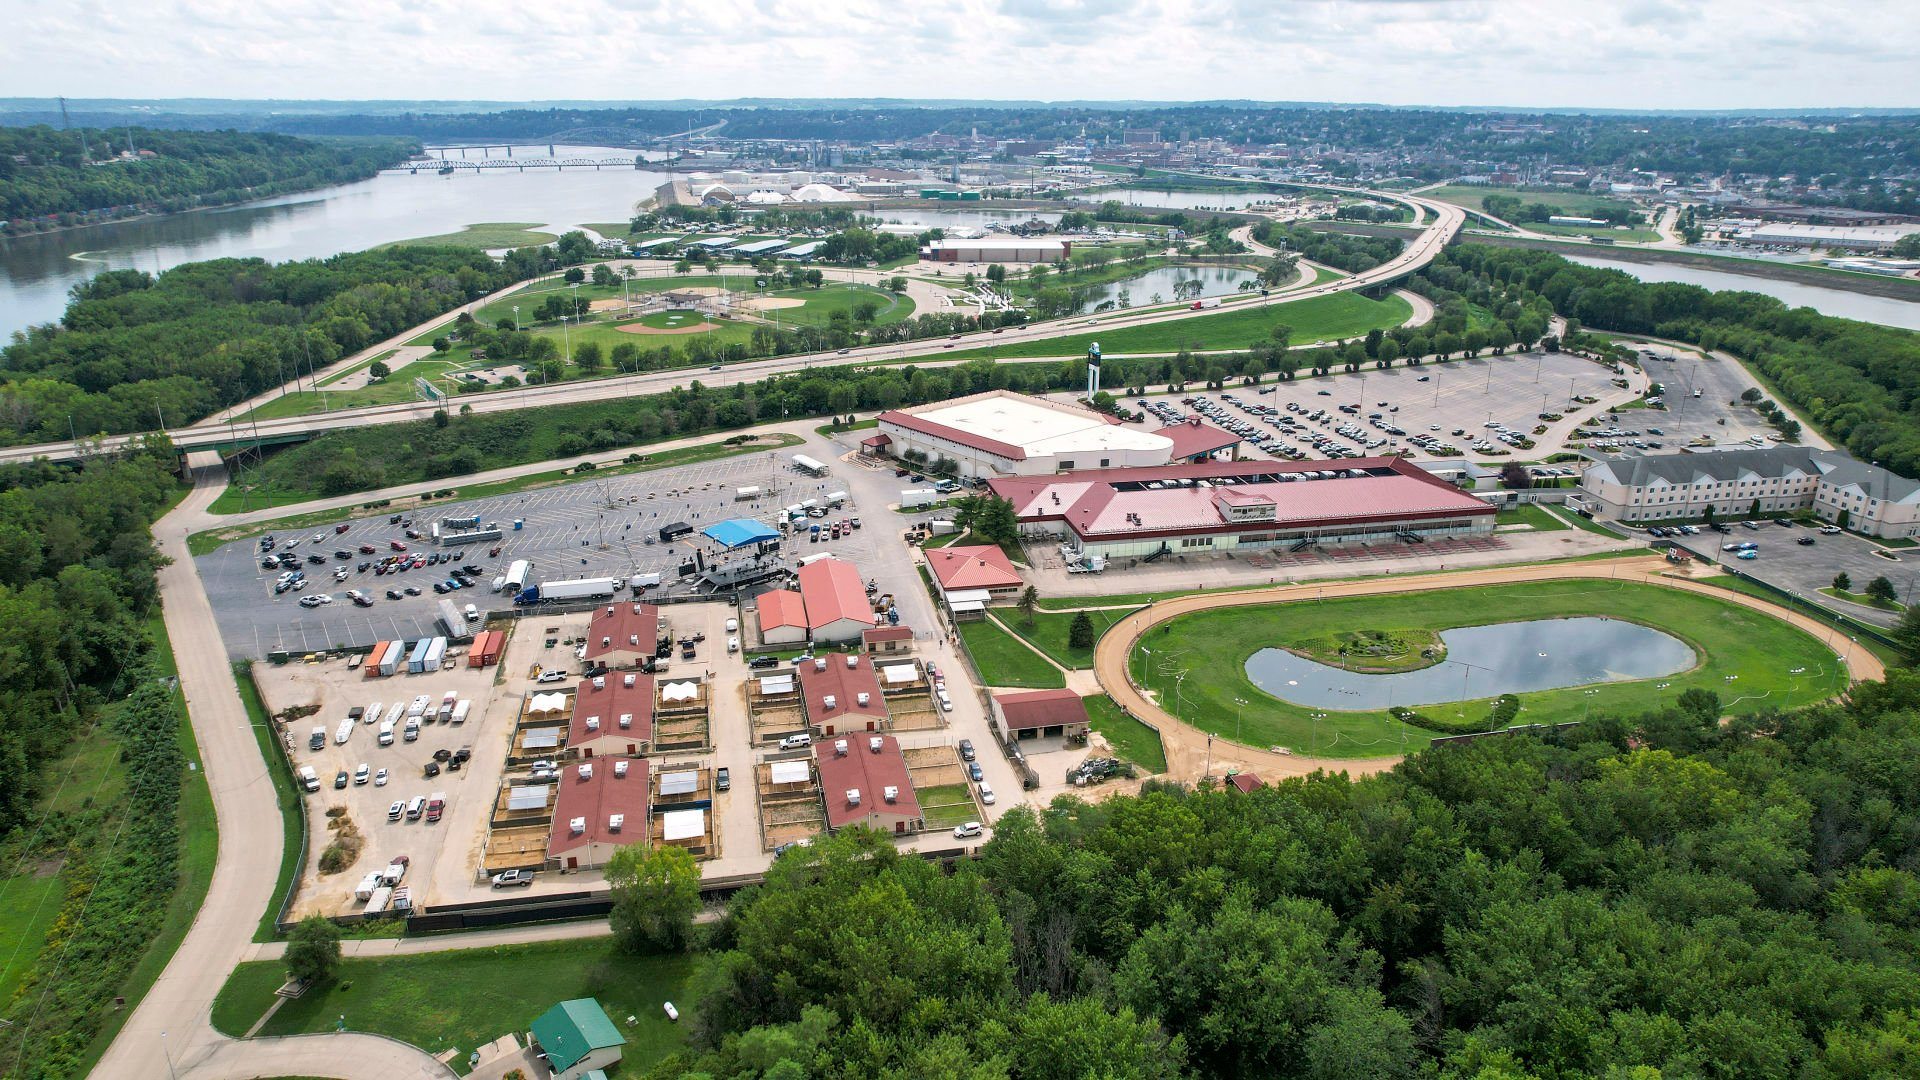 Iowa Greyhound Park (bottom right) will close after a final, abbreviated season ends in May 2022. The park will be incorporated into long-term plans for improvements to Chaplain Schmitt Island.    PHOTO CREDIT: Dave Kettering